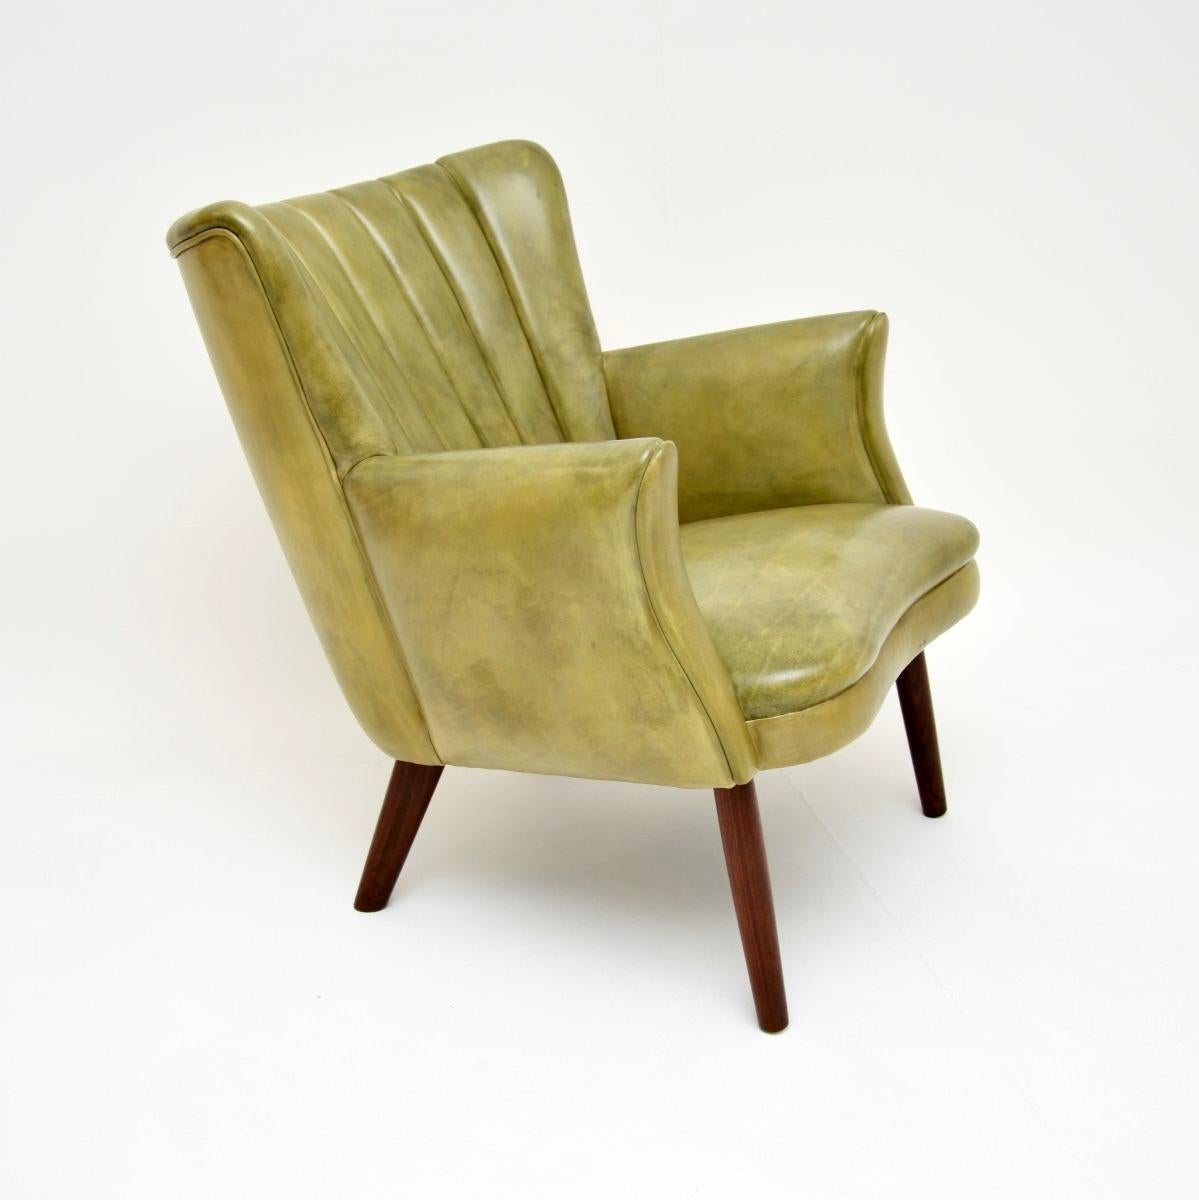 Danish Vintage Leather Armchair by Skipper In Good Condition For Sale In London, GB